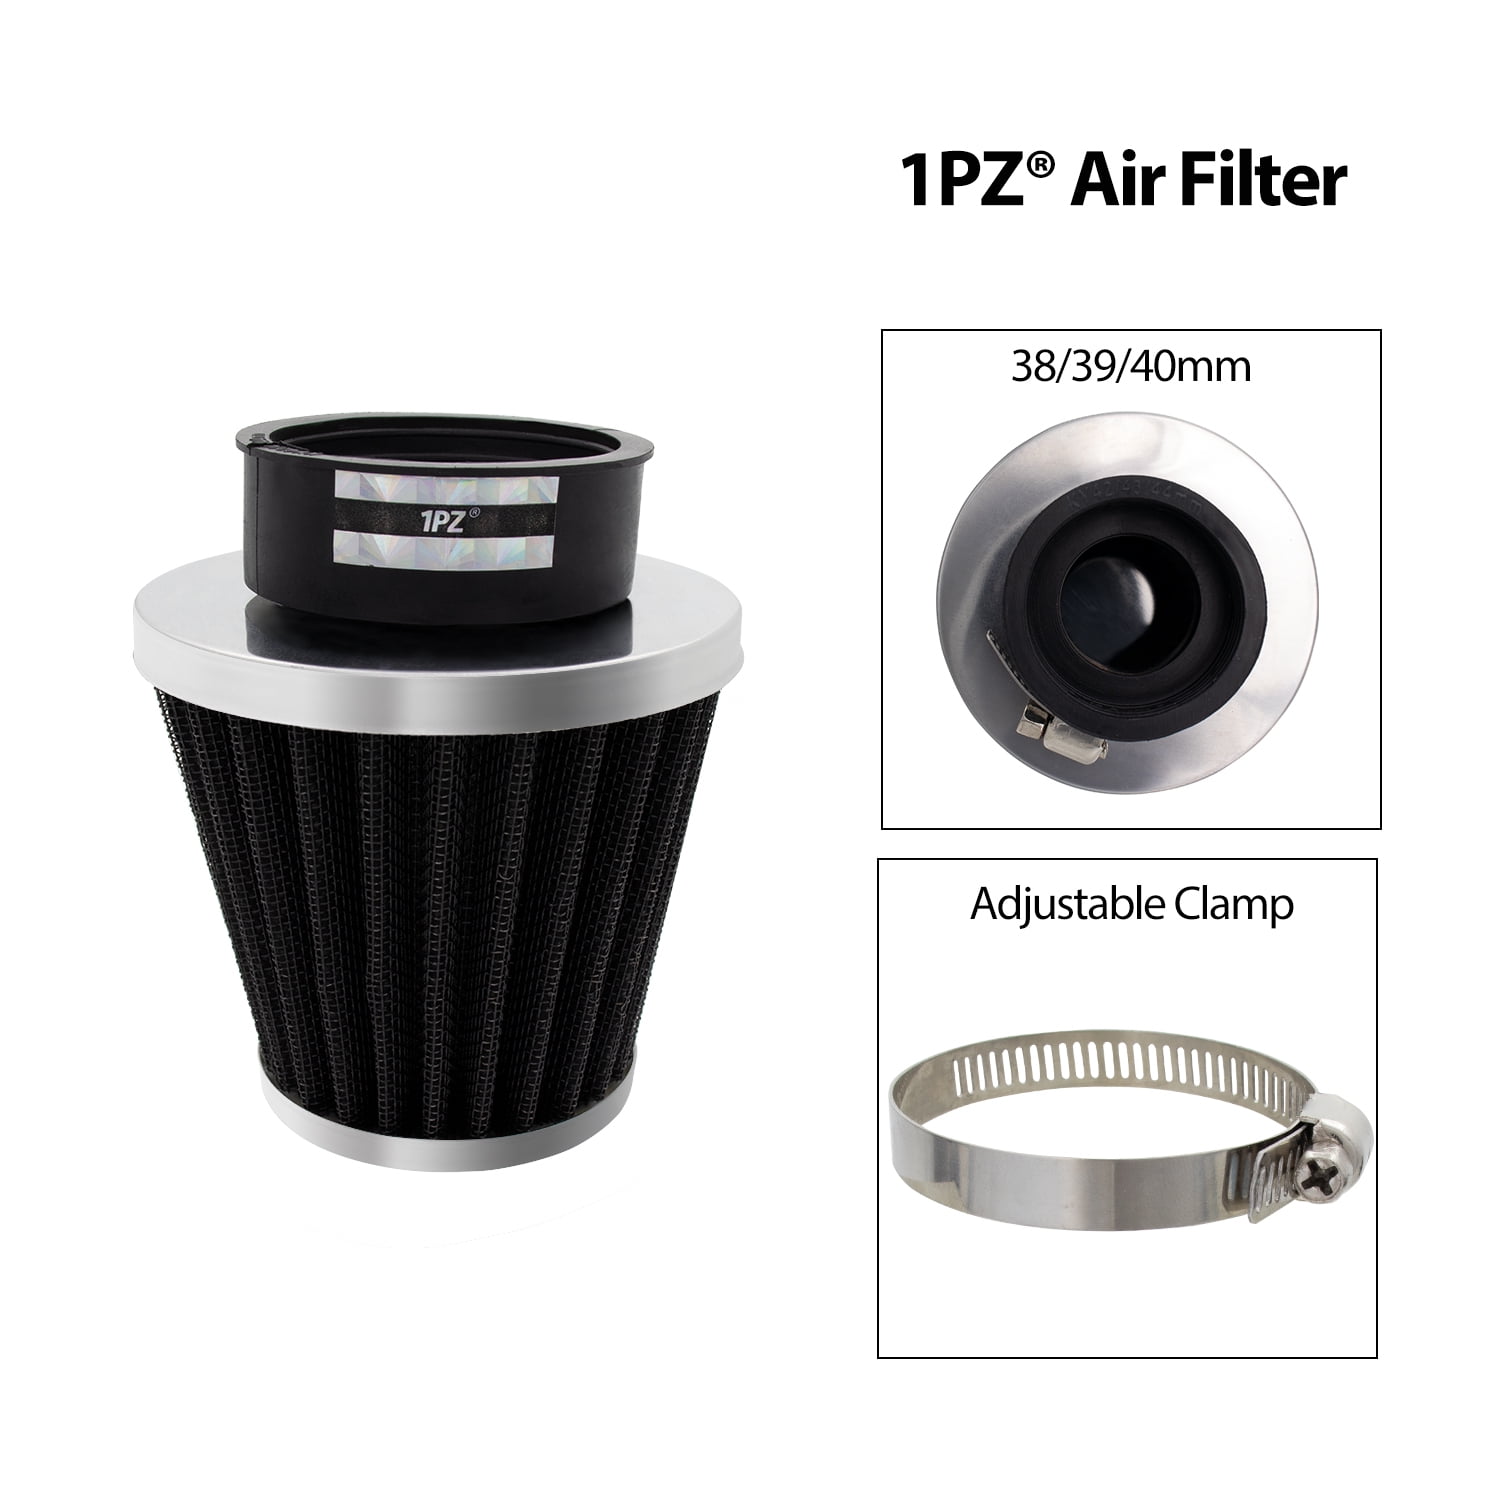 38mm Universal Air Filter Fuel Filters Kit for GY6 50cc 139QMB Motorcycle Scooter Moped 50cc 110cc 125cc SDG SSR Dirt Pit Bike Air Filter Cleaner-by DFuerdivn 